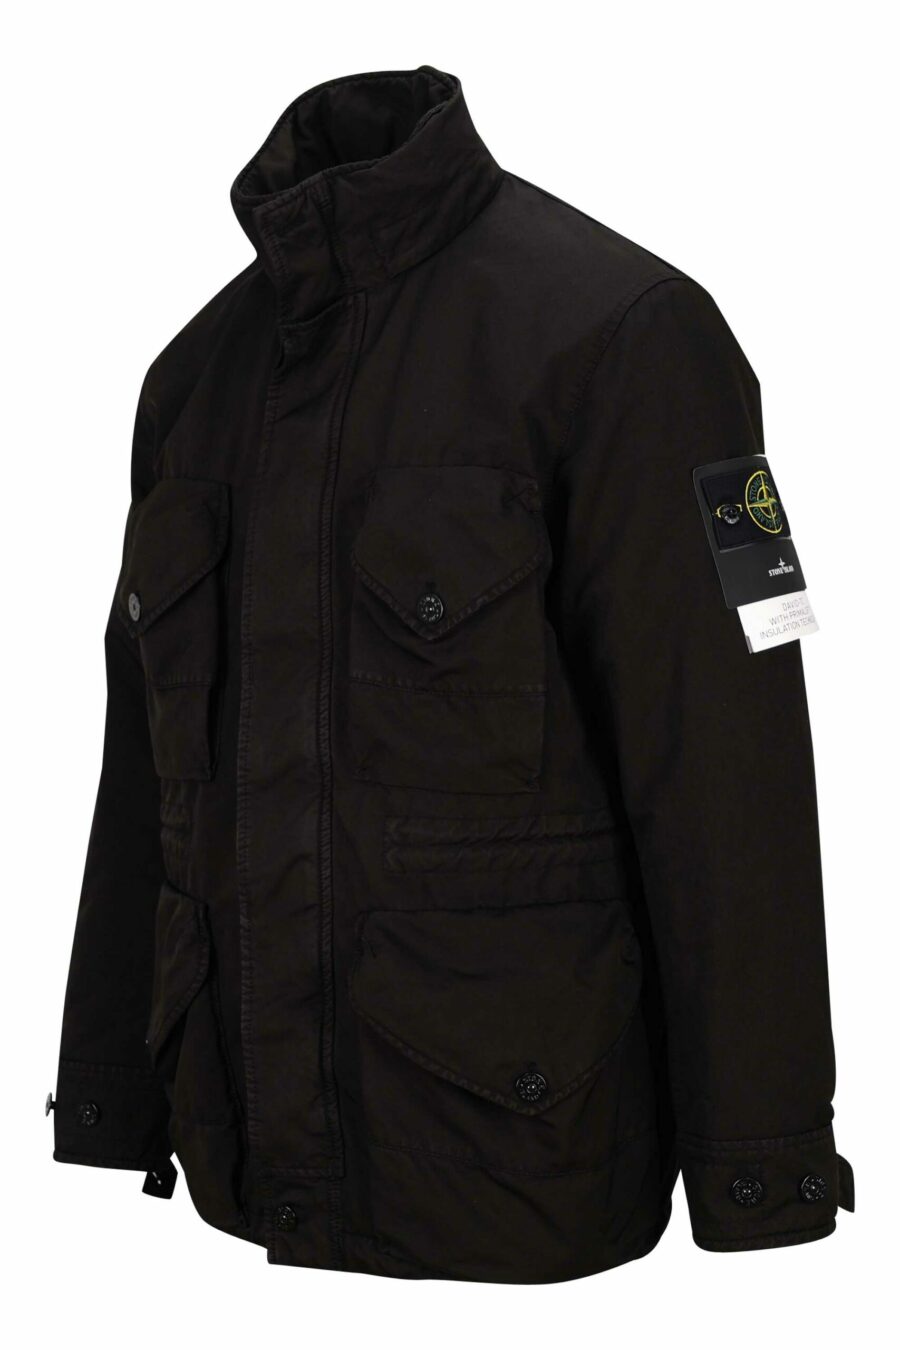 Black parka with pockets and logo patch on the side - 8052572794827 1 scaled